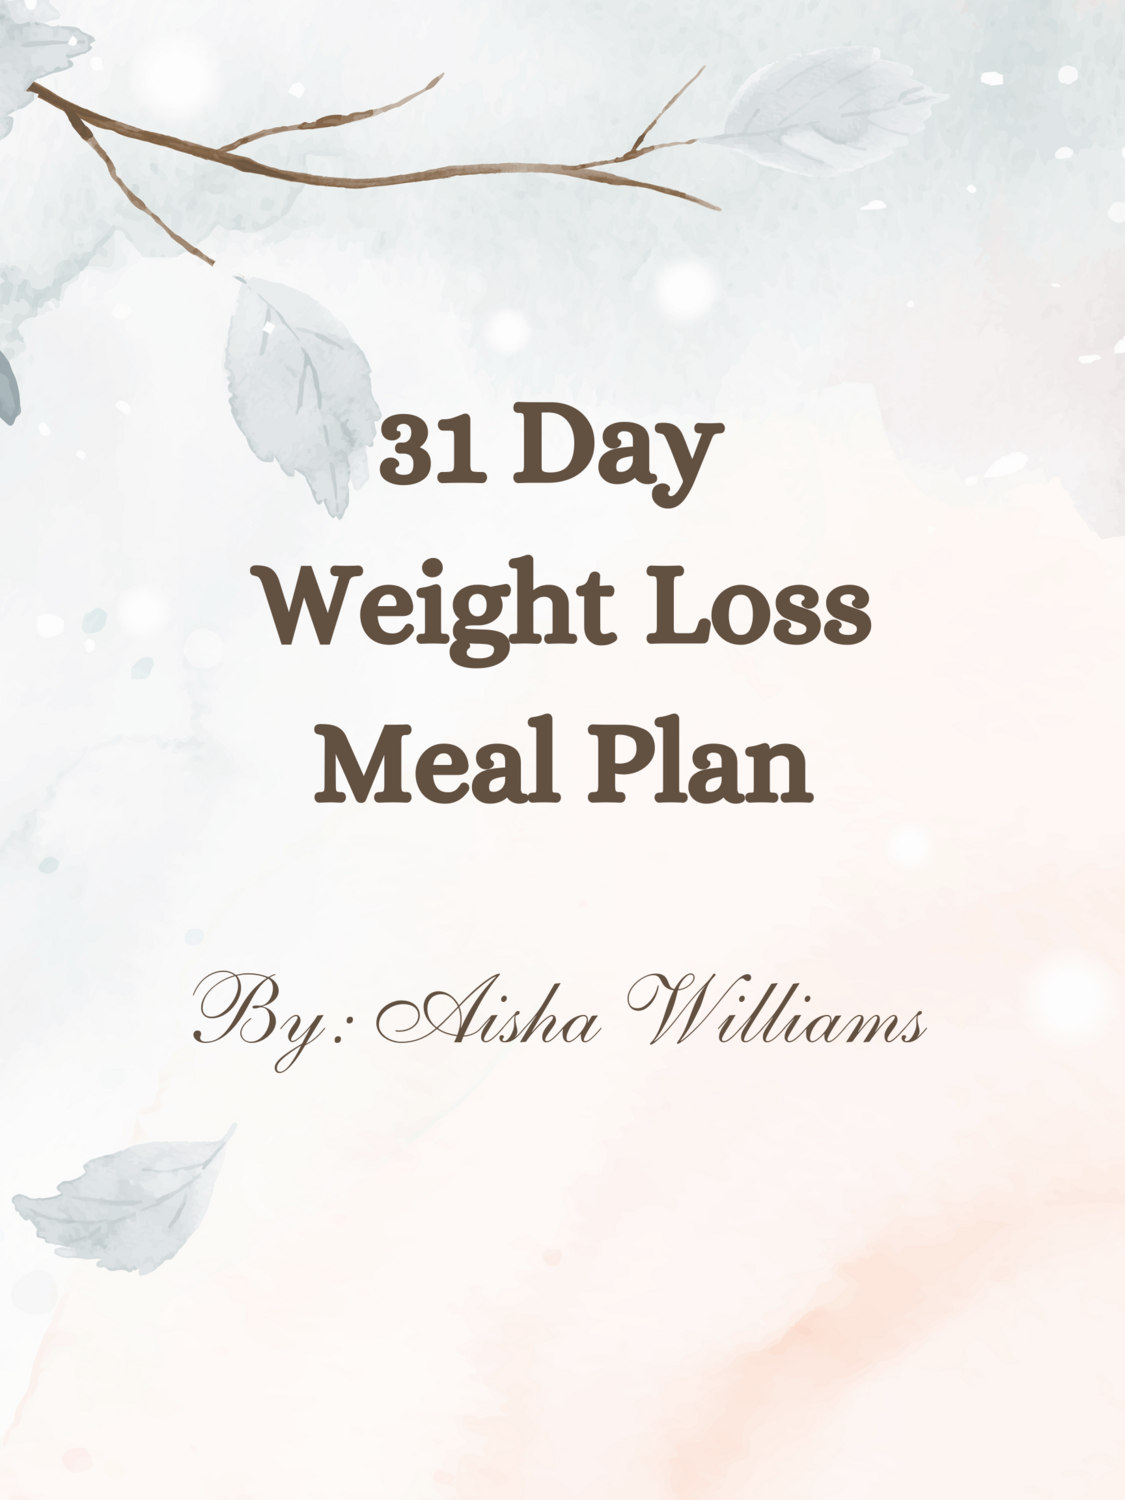 31 Day Weight Loss Meal Plan